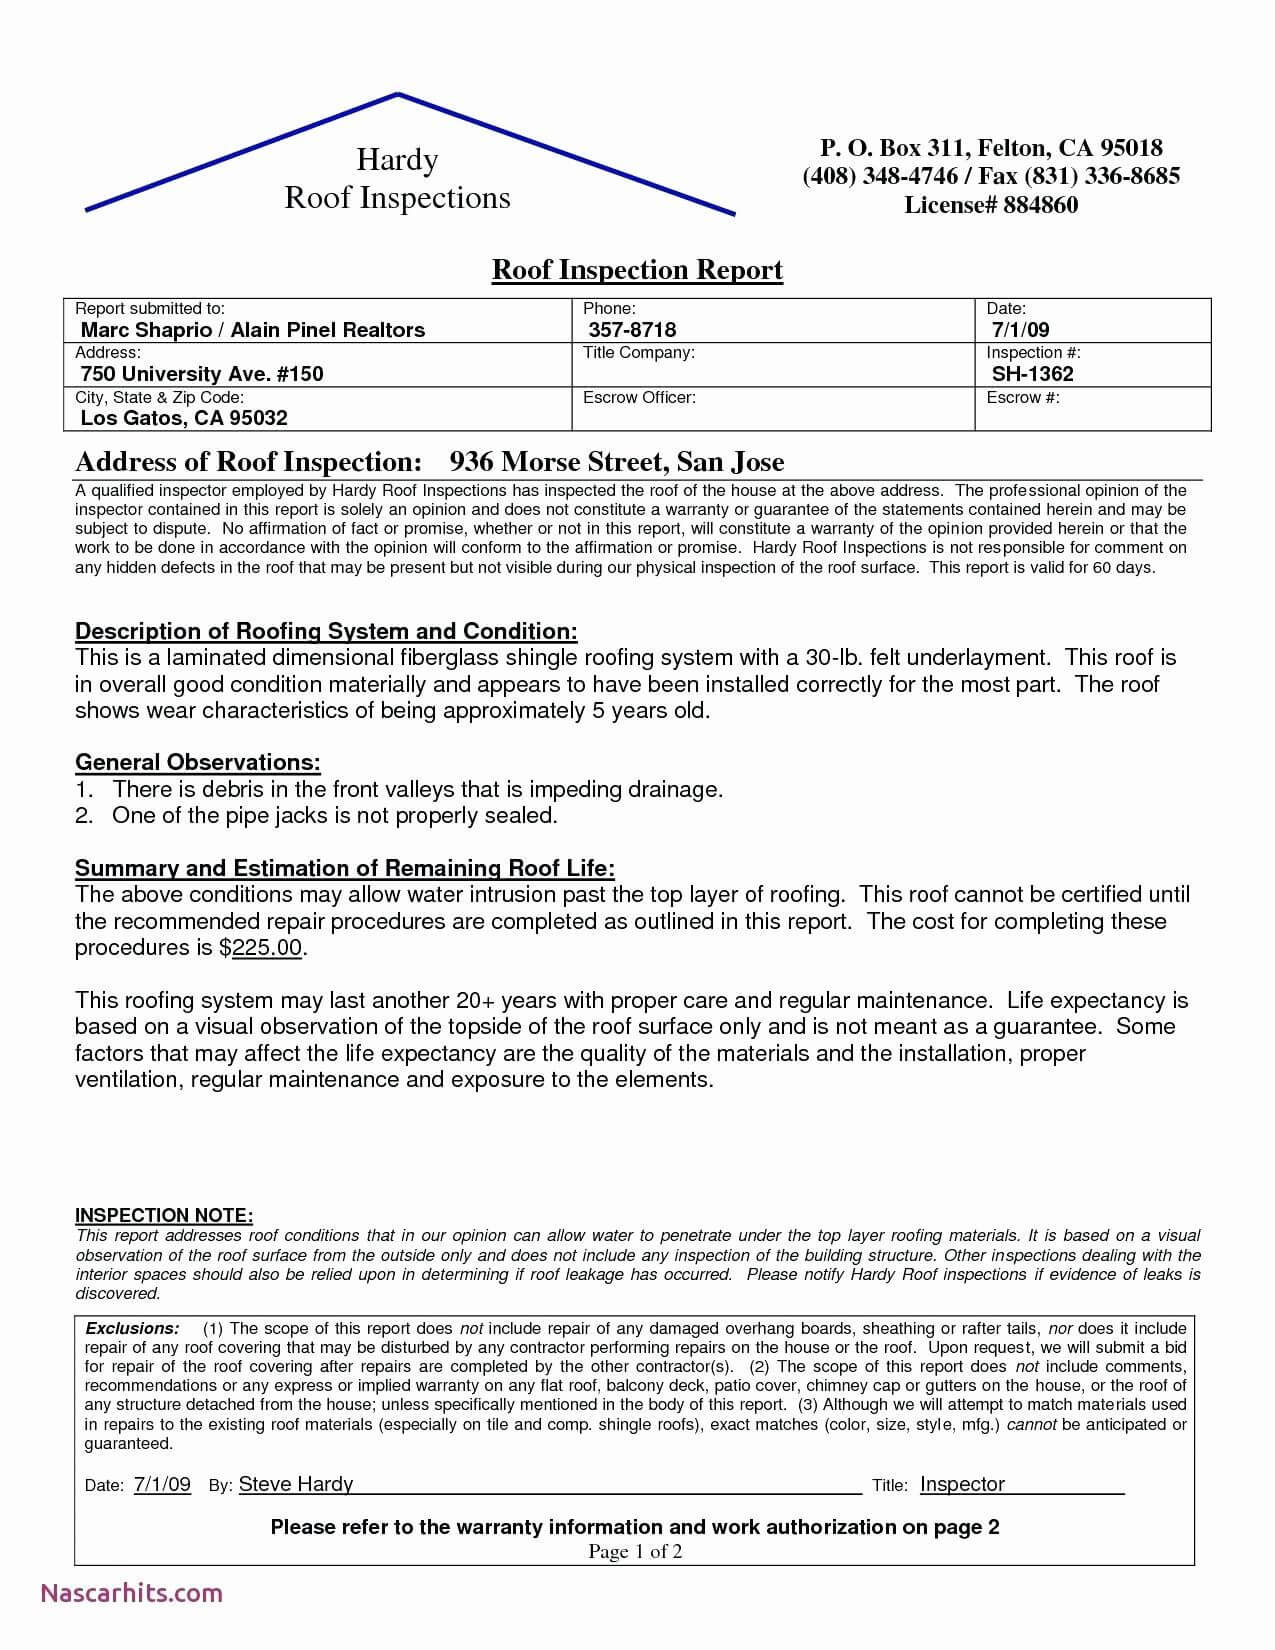 Inspection Report Template Word Best Of Template Inspection Throughout Roof Inspection Report Template